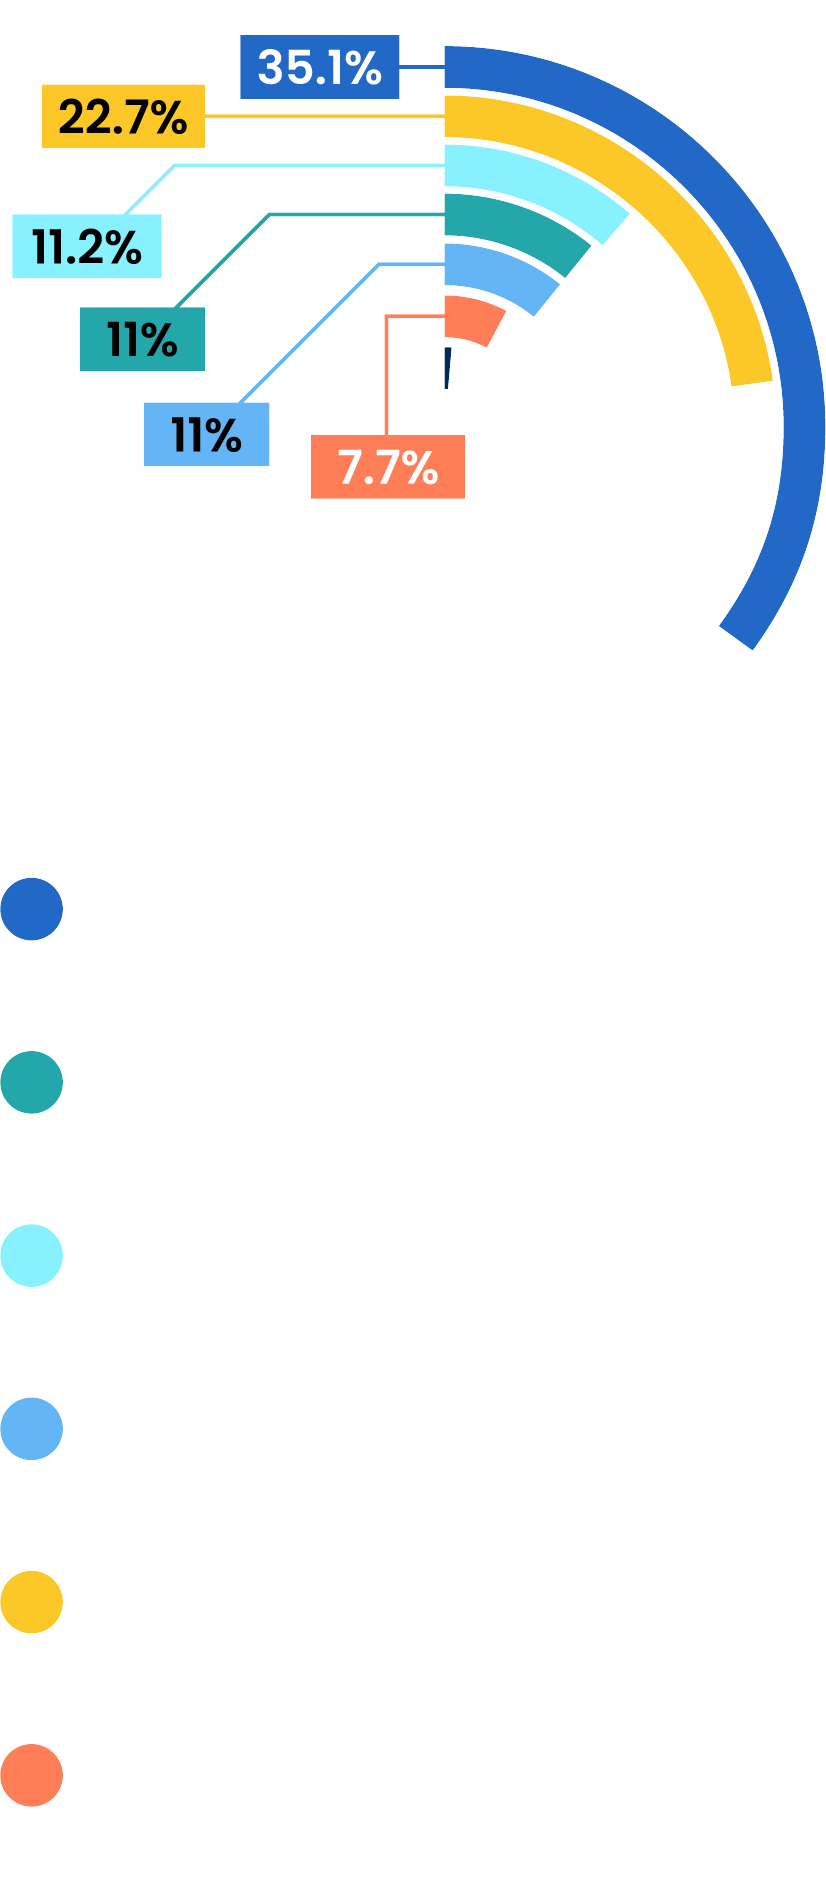 What Advantages Do You Associate the Most With Using Animation in Your Marketing Strategy?